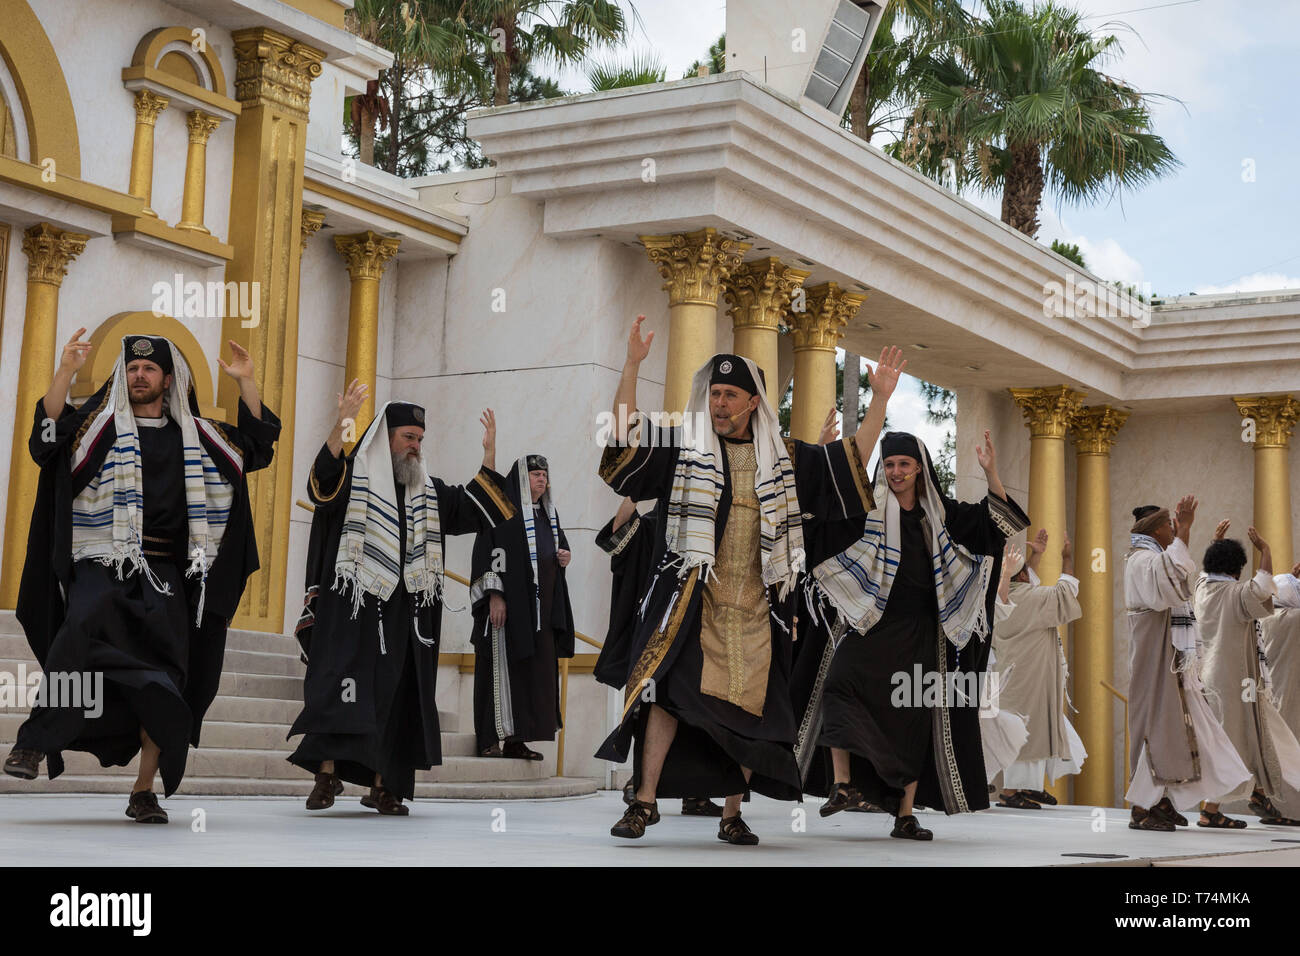 Orlando, Florida, USA. 3rd May, 2019. Actors dance during the ''Jesus At The Temple'' performance at The Holy Land Experience (HLE) in Orlando, Florida. The theme park, owned by the Trinity Broadcasting Network, recreates the architecture and themes of the ancient city of Jerusalem in 1st-century Judea. HLE is a non-denominational Christian living biblical museum and church. The park opened in February 2001. Credit: Tracy Barbutes/ZUMA Wire/Alamy Live News Stock Photo